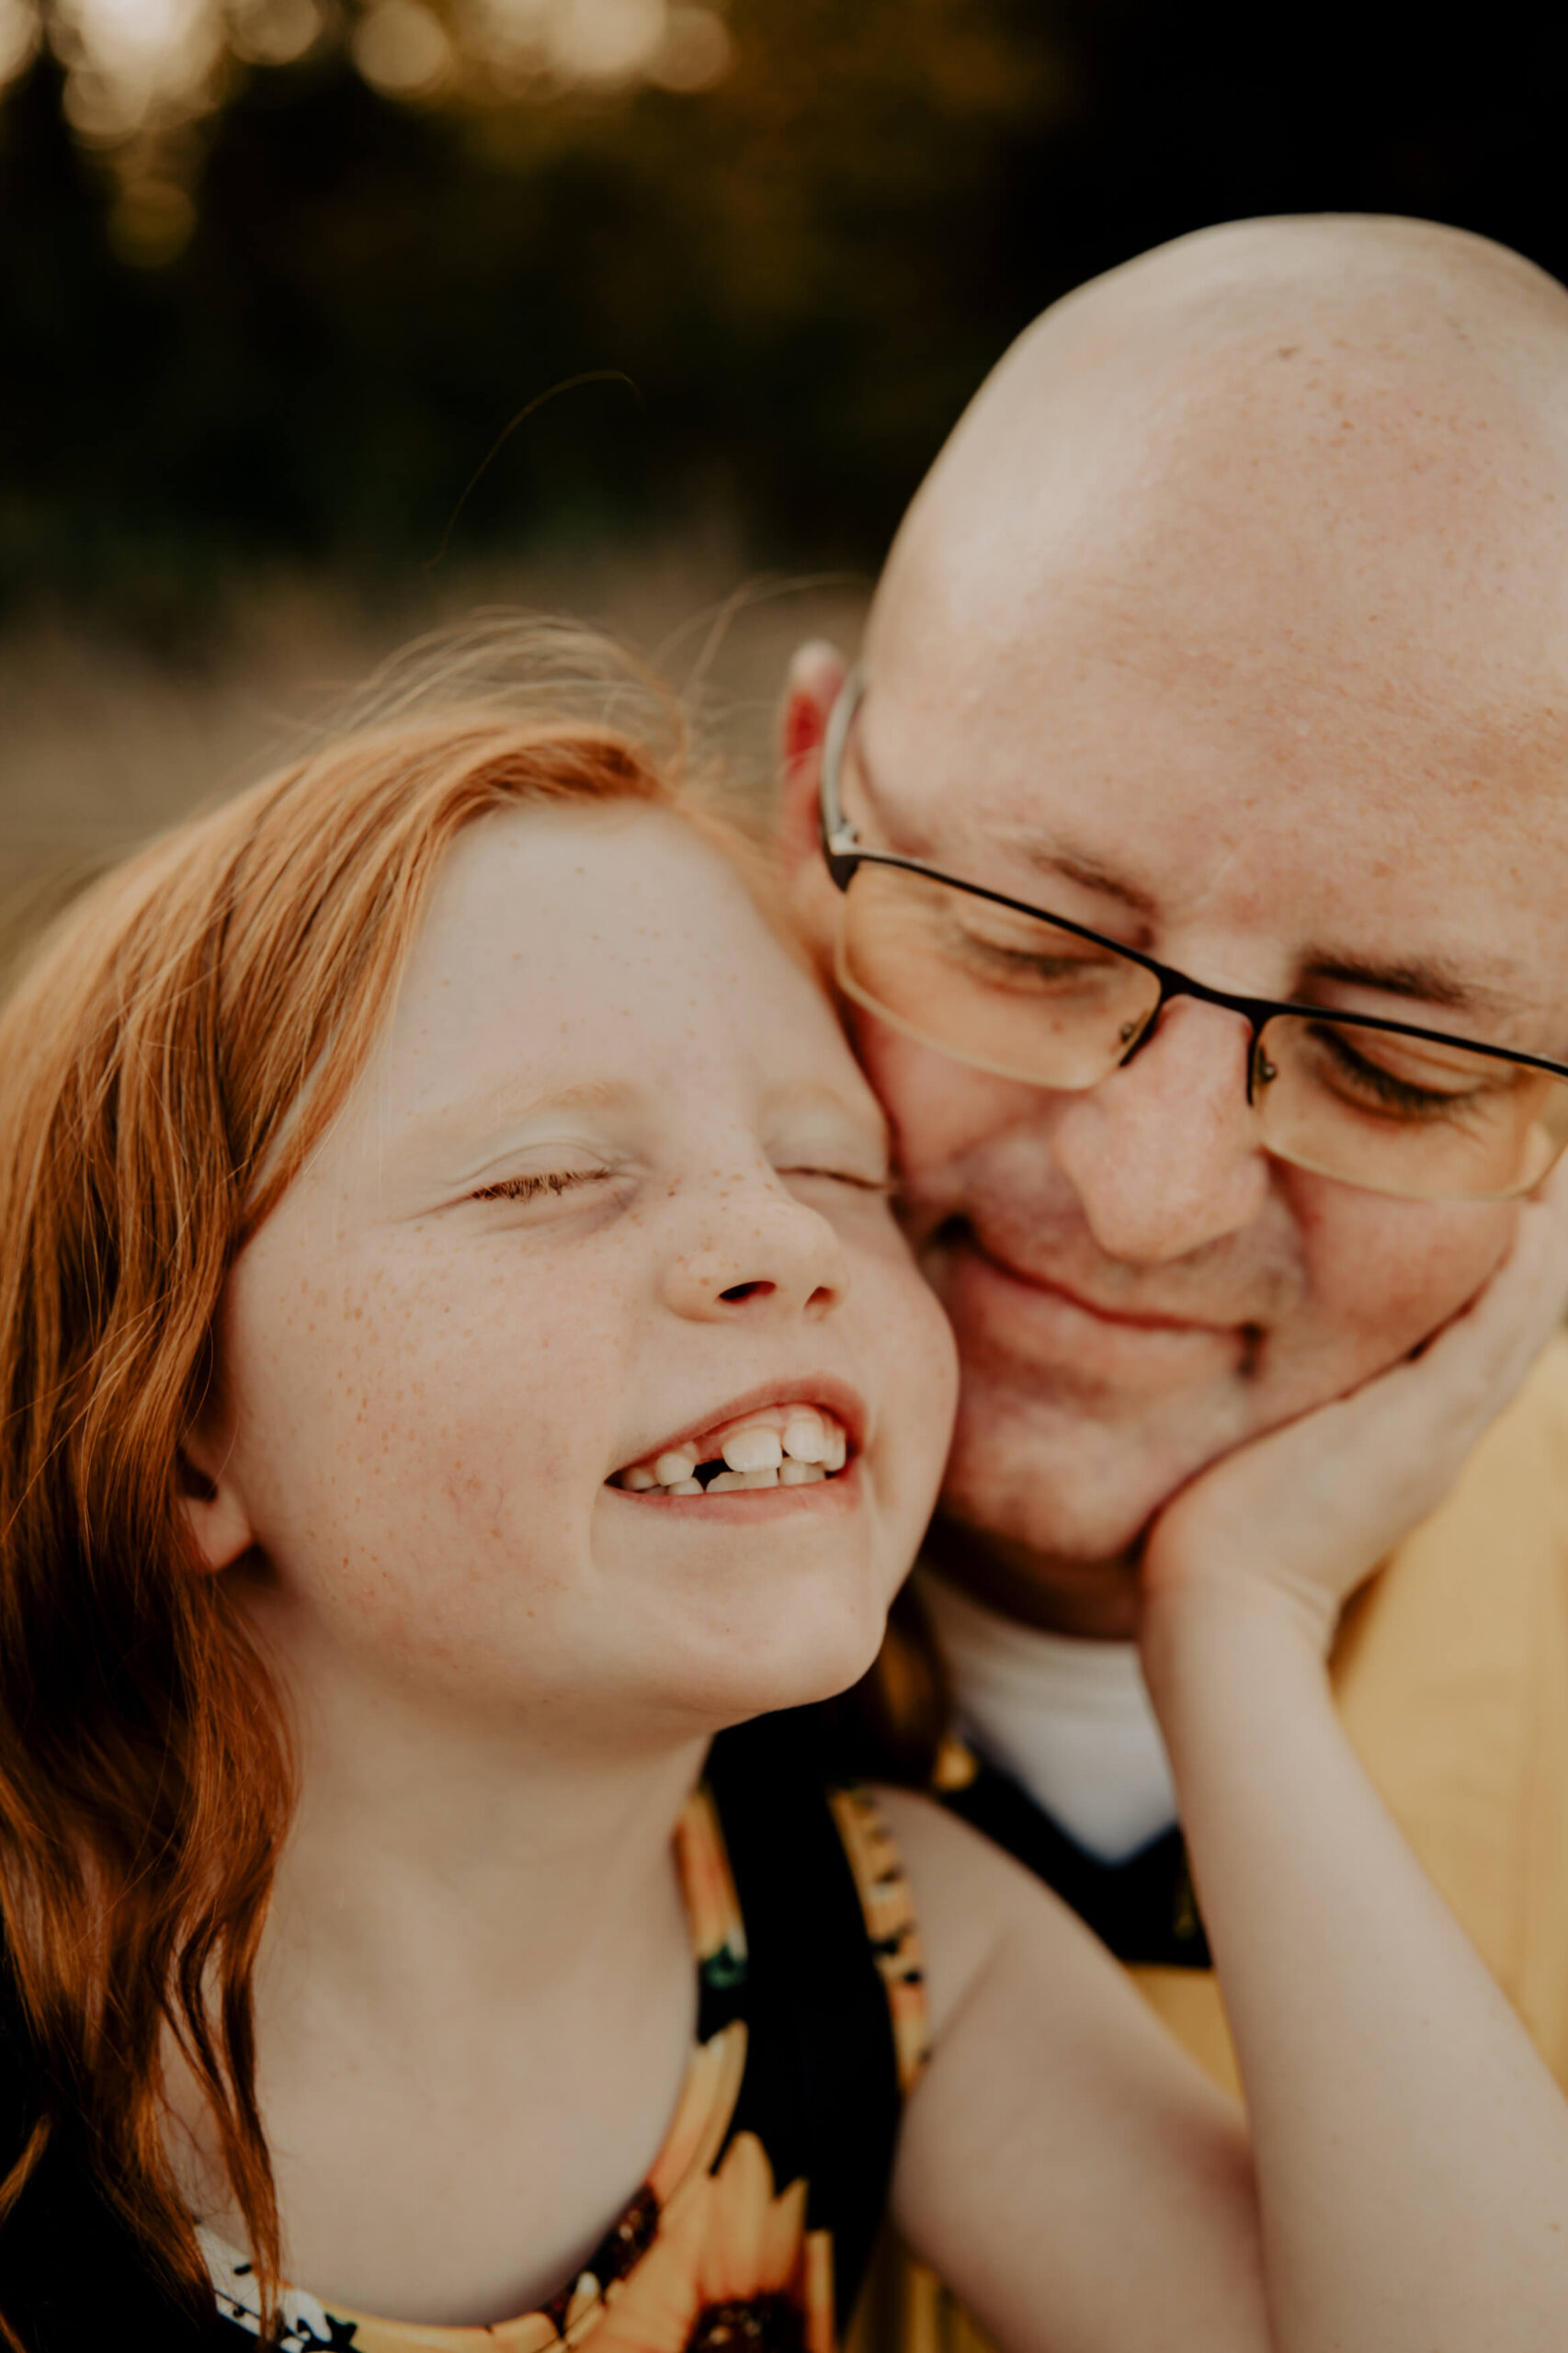 Sweet image of a young redheaded girl with freckles snuggling with her Dad.